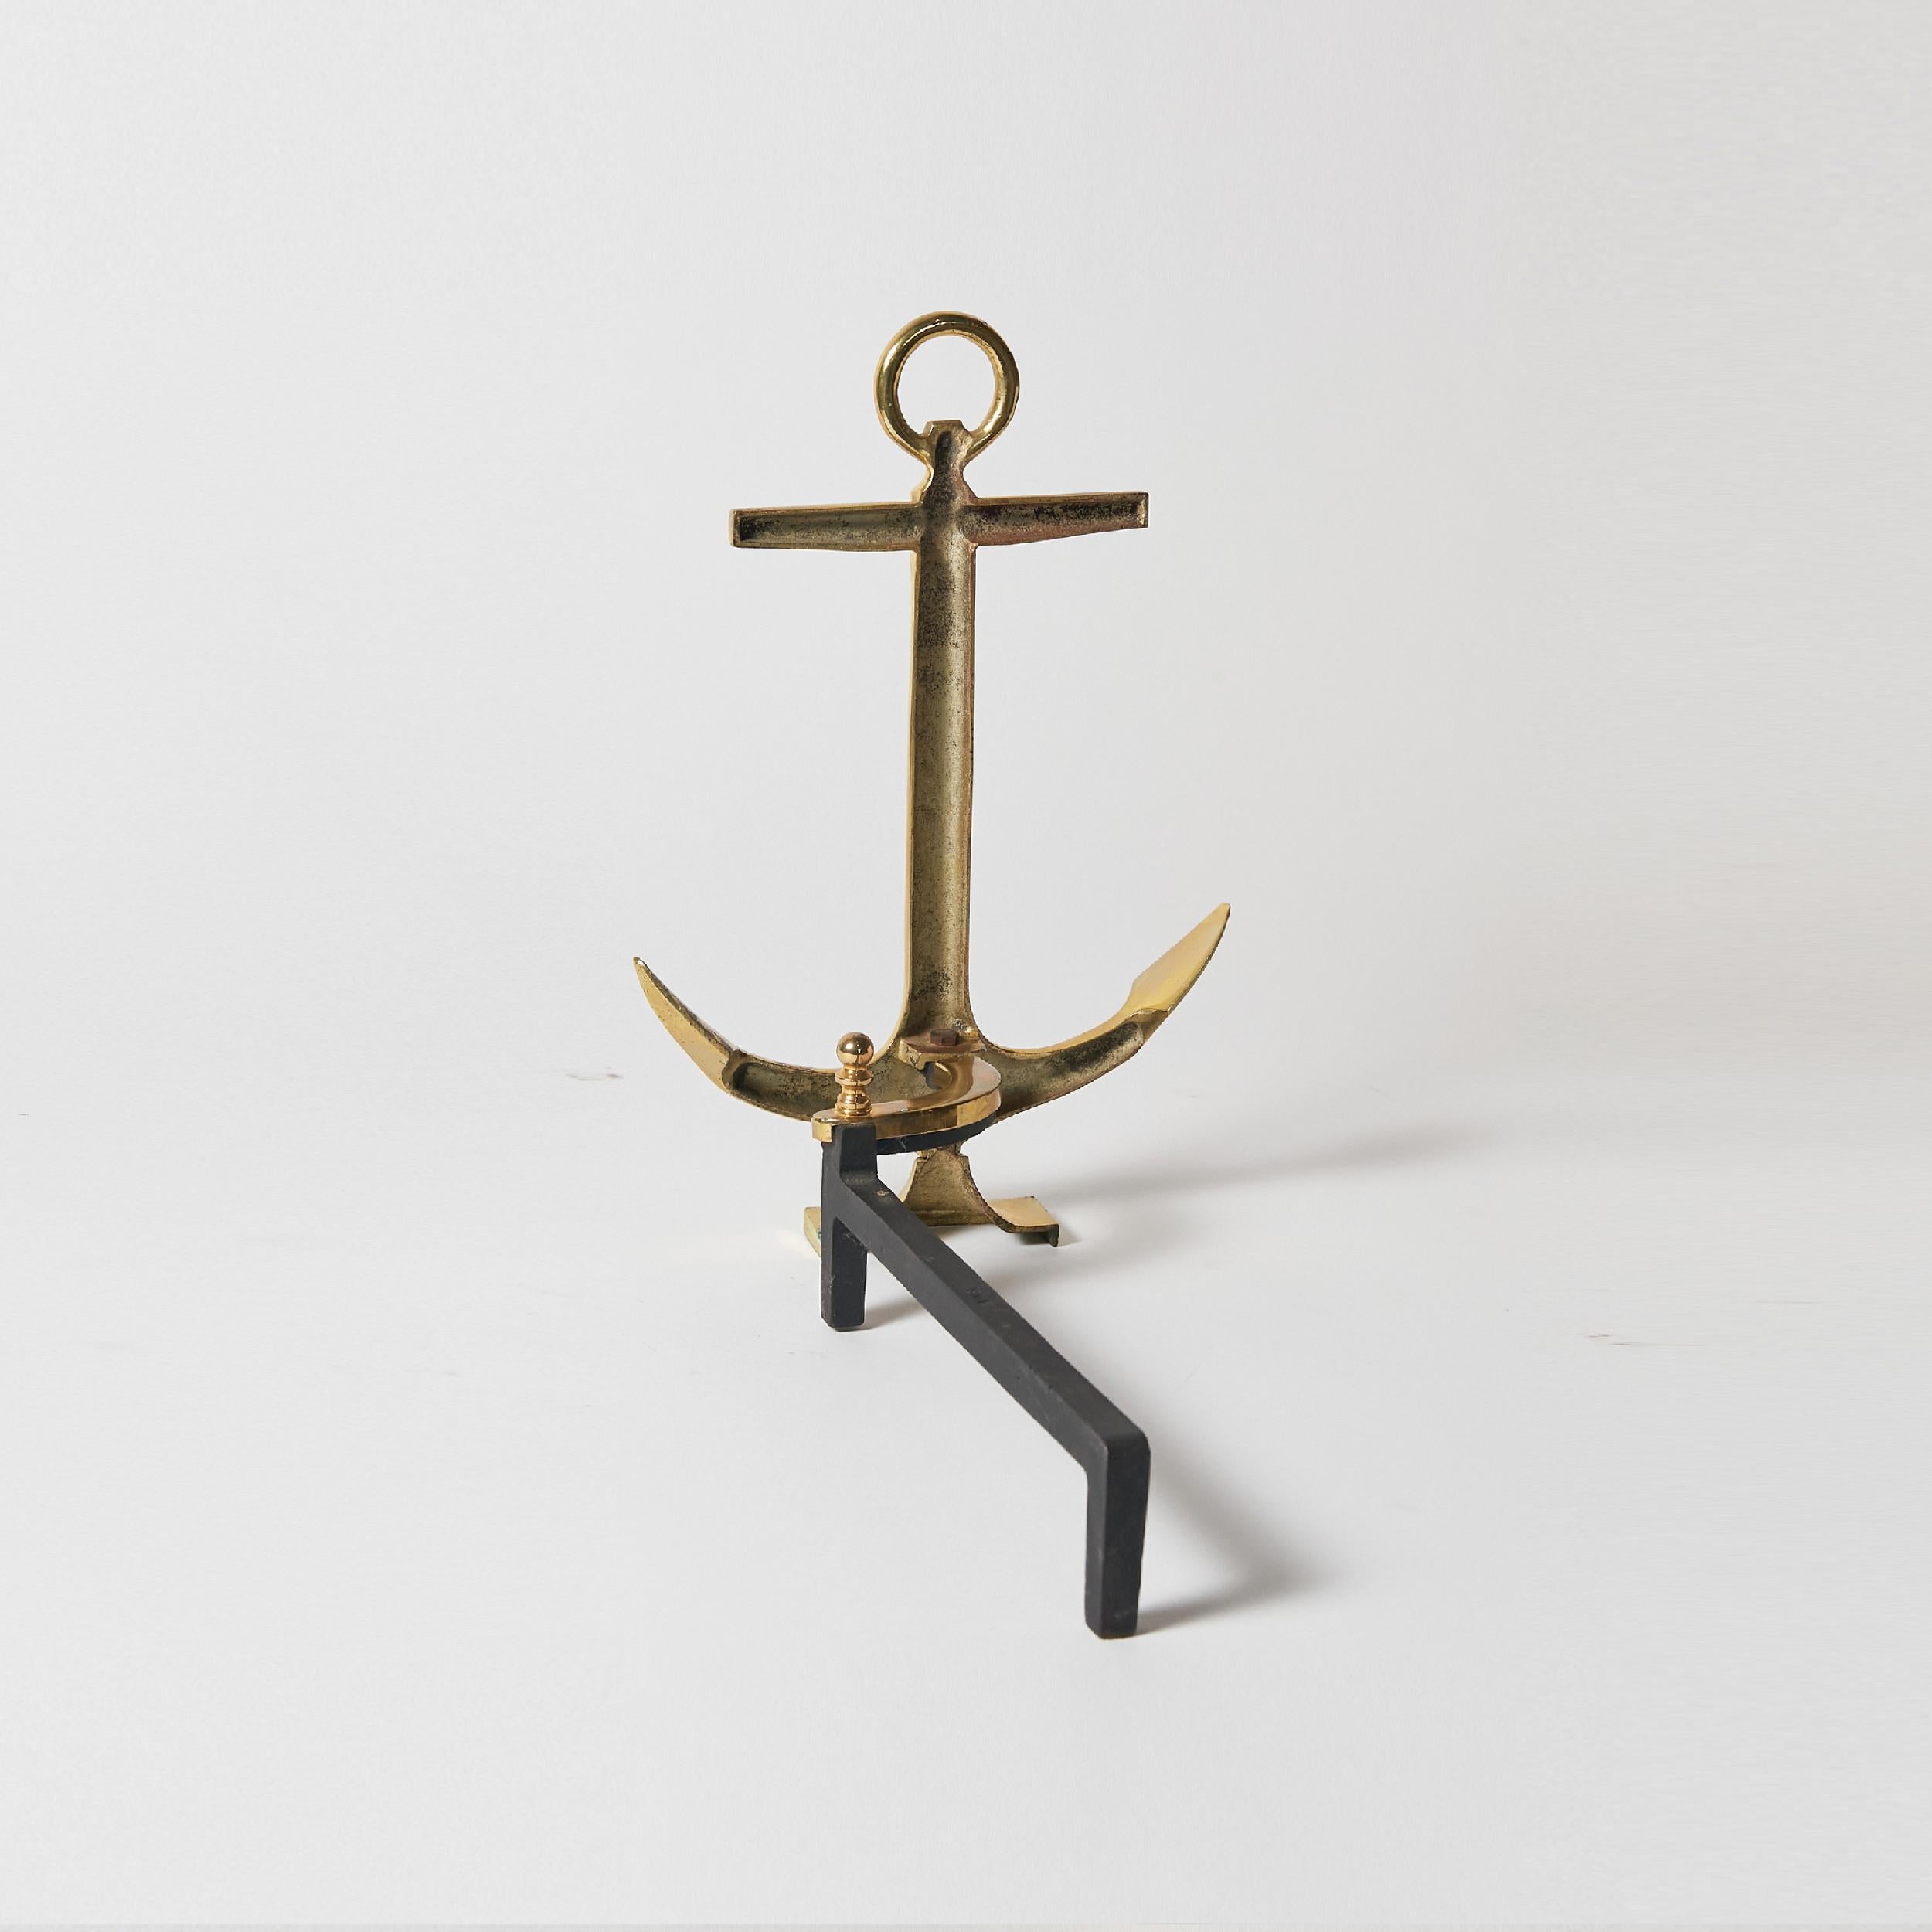 American Pair of 1940 Anchor-Shaped Andirons in Polished Brass For Sale